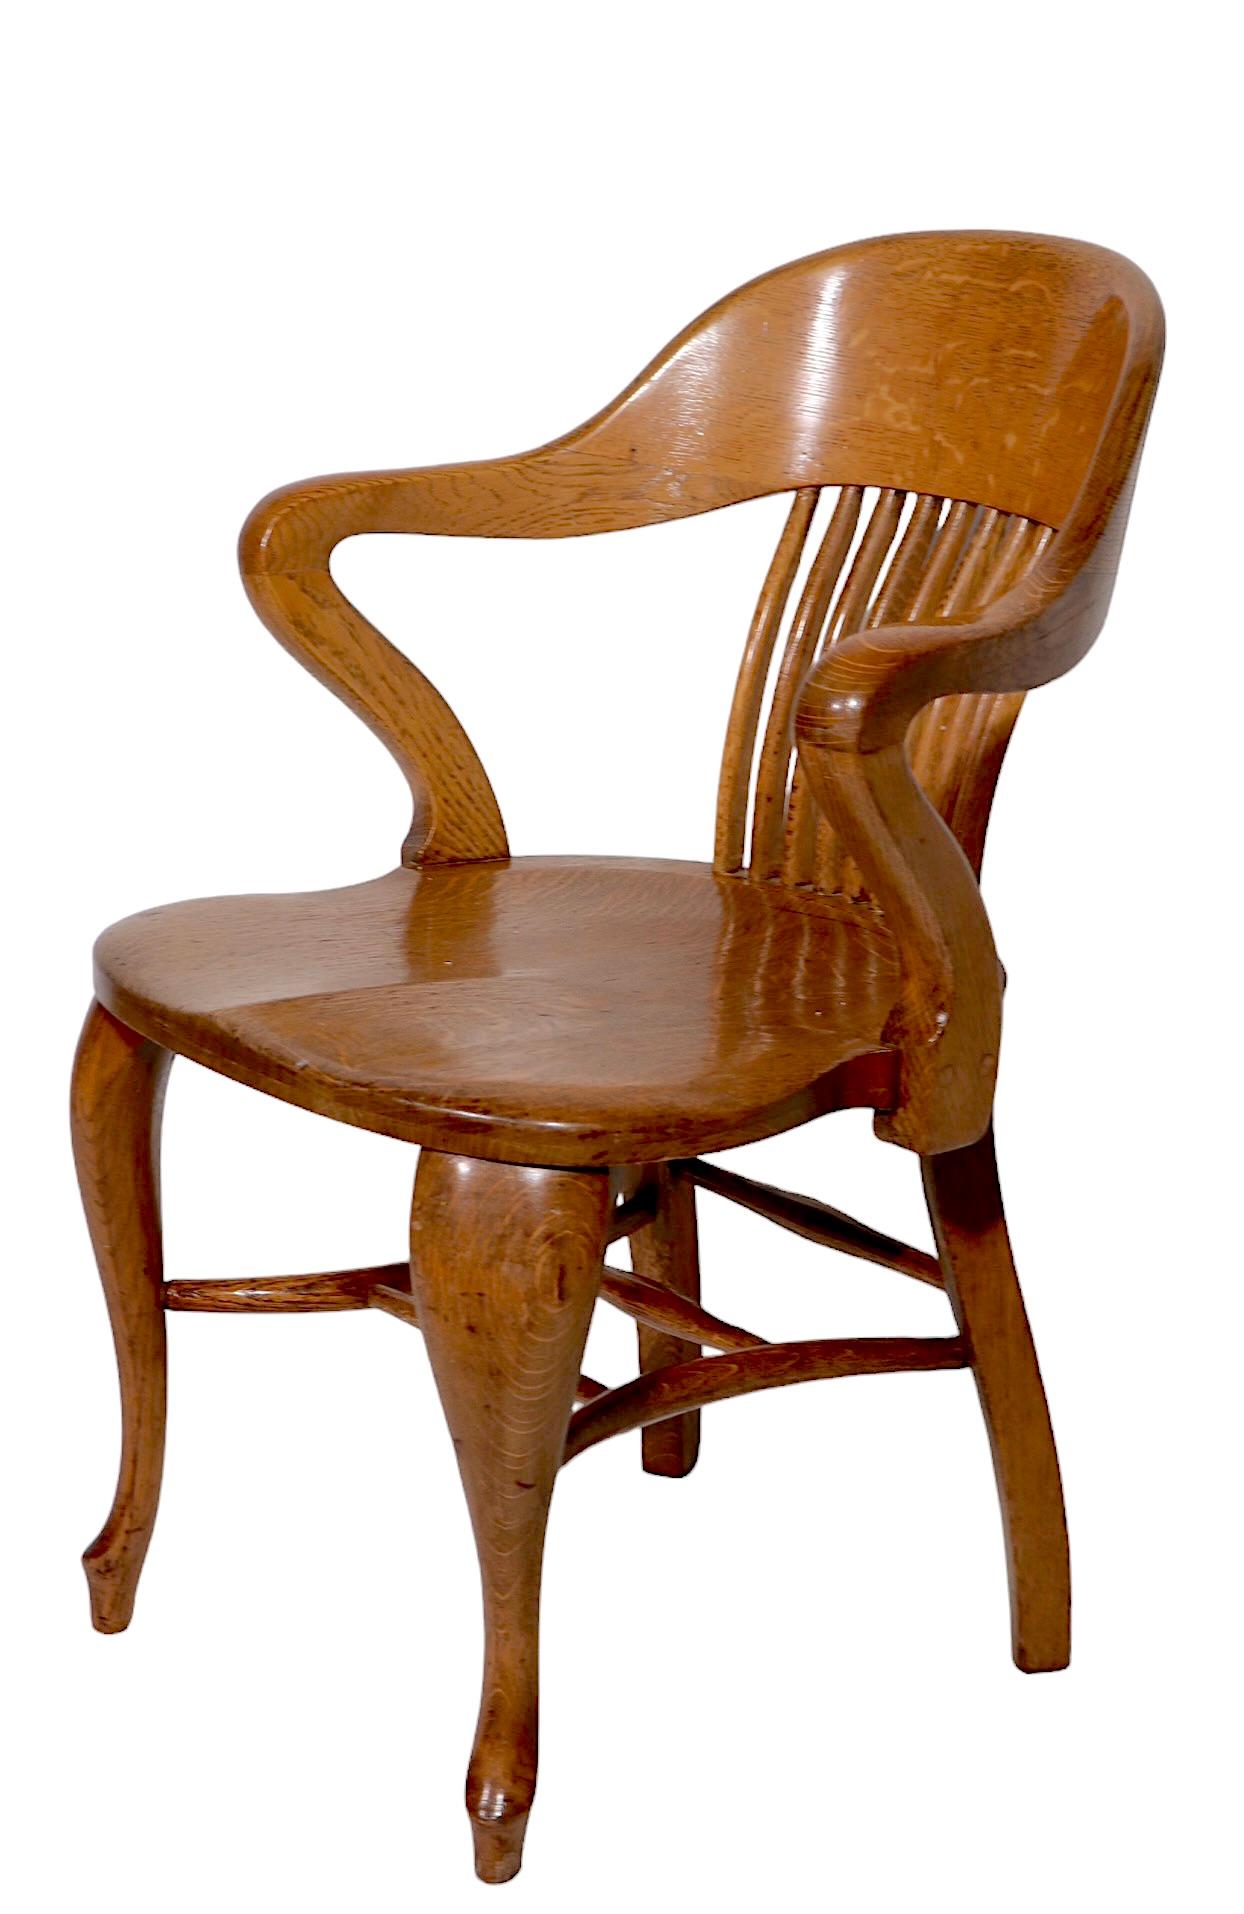 Exceptional Bank of England, Jury style arm chair in solid oak. The chair features a curvaceous continuous arm and  back rest, on curved cabriole style legs. This example is very solid, and sturdy, is has been nicely refinished and is in clean,